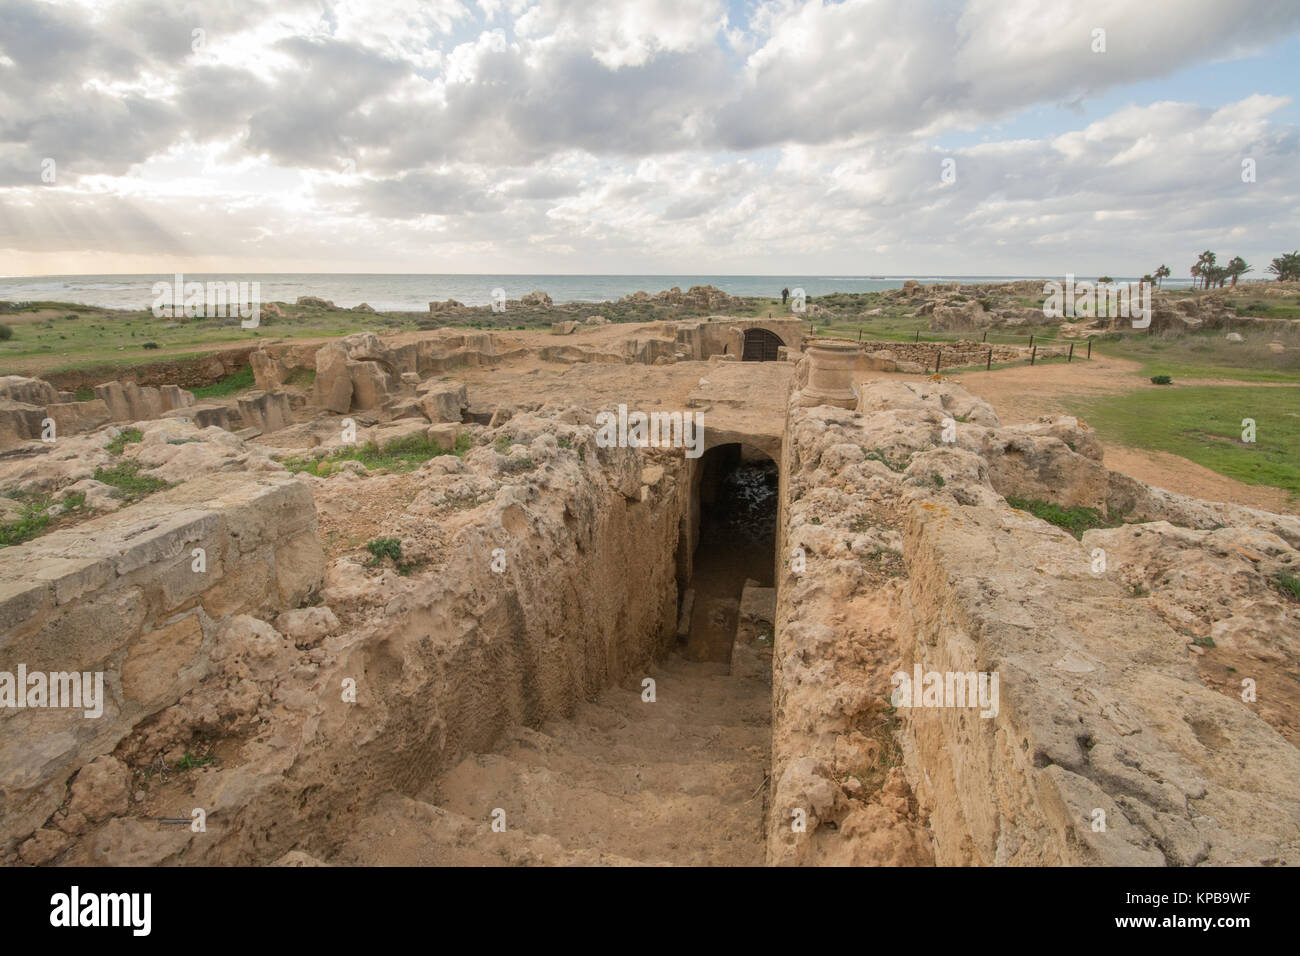 The Tombs of the Kings, part of the archeological site in Paphos, Cyprus Stock Photo